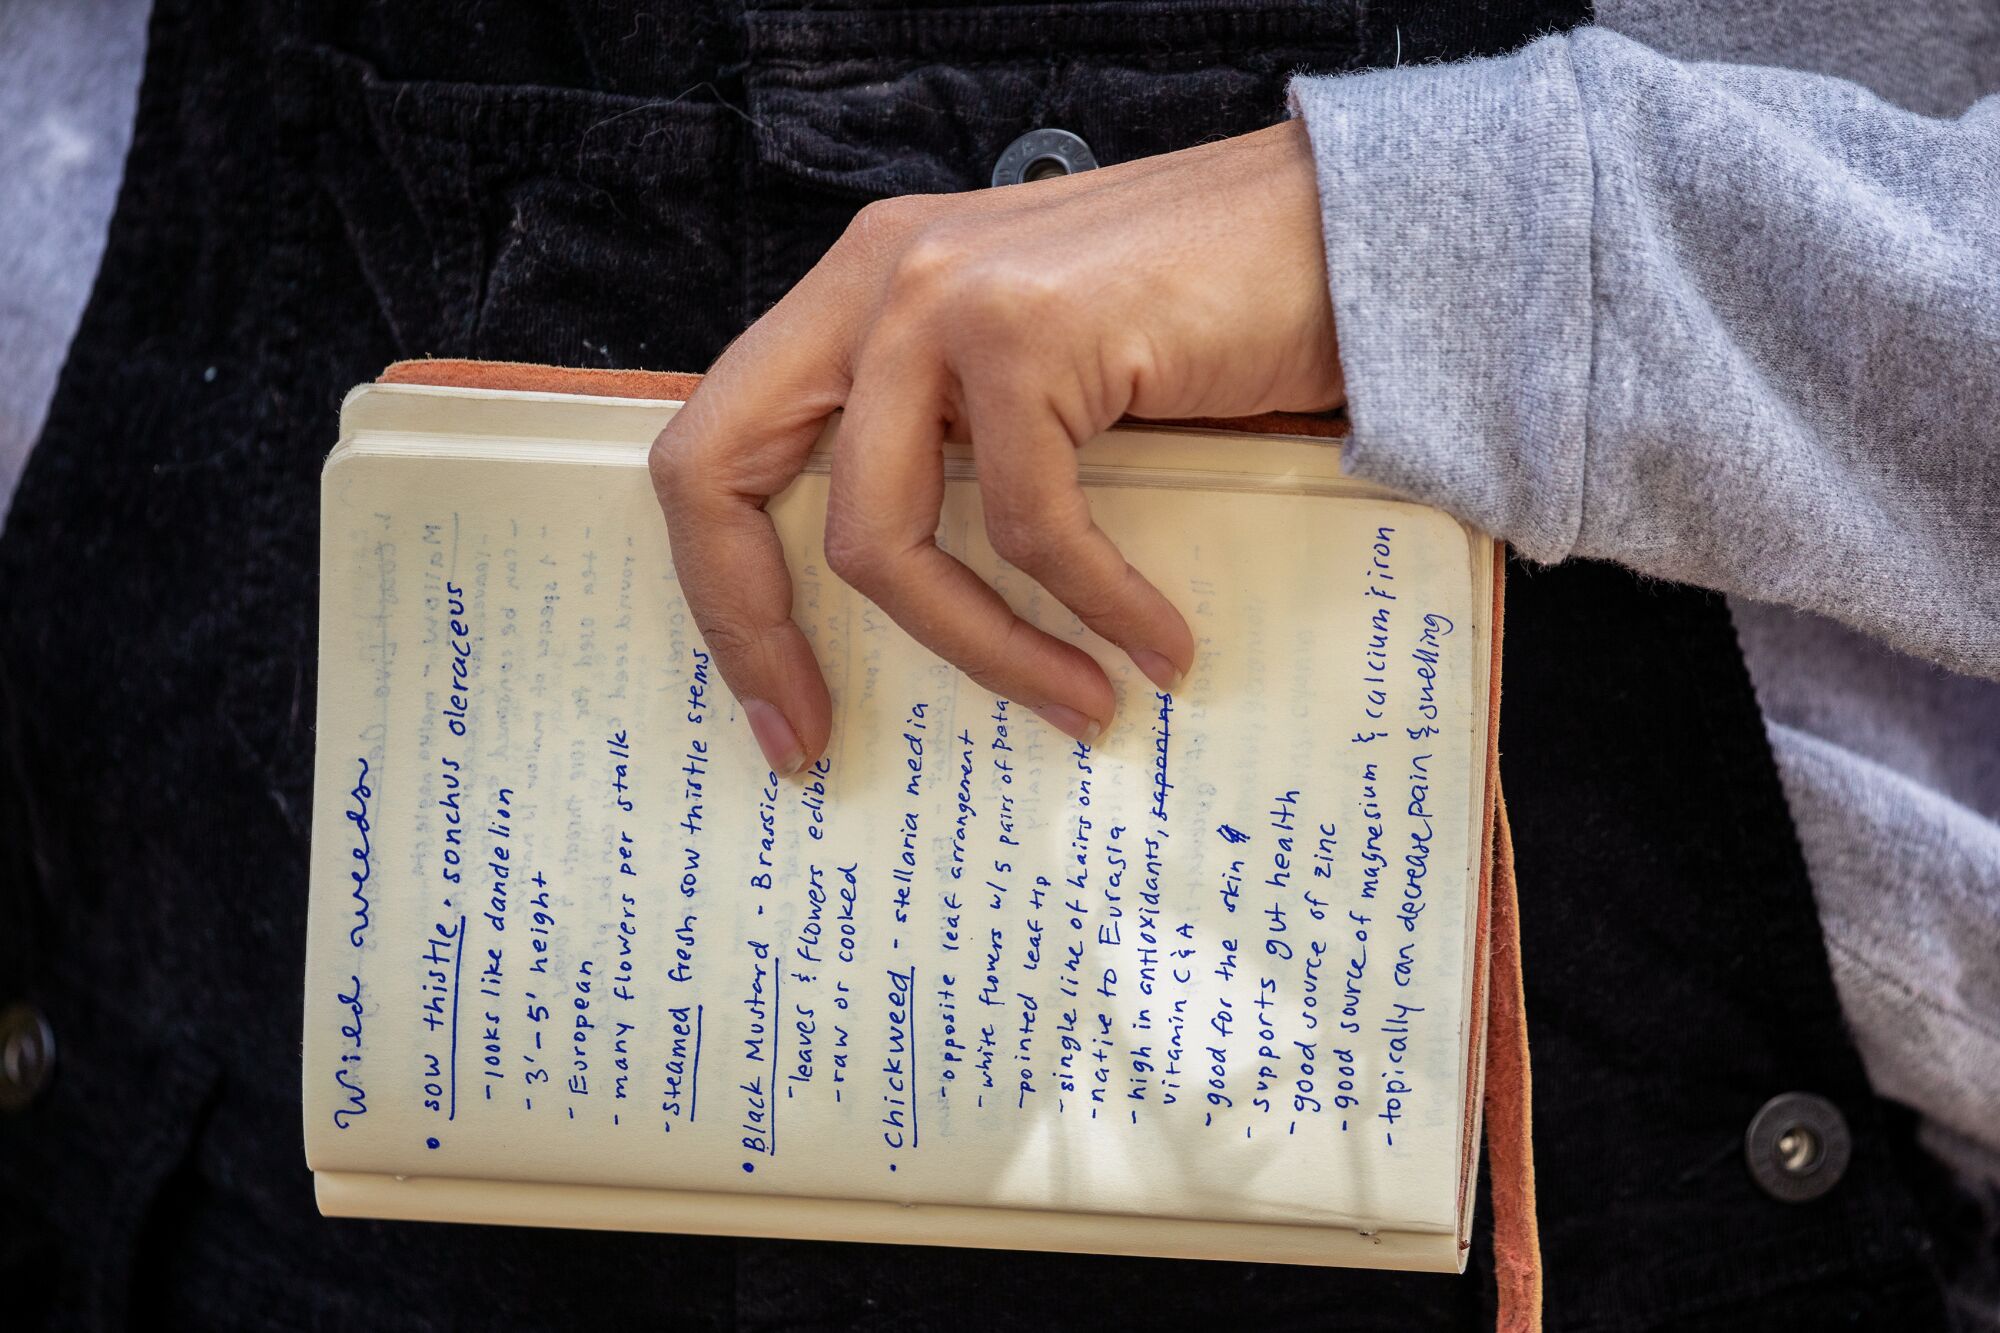 A close-up of a hand holding a journal with handwritten notes in it.